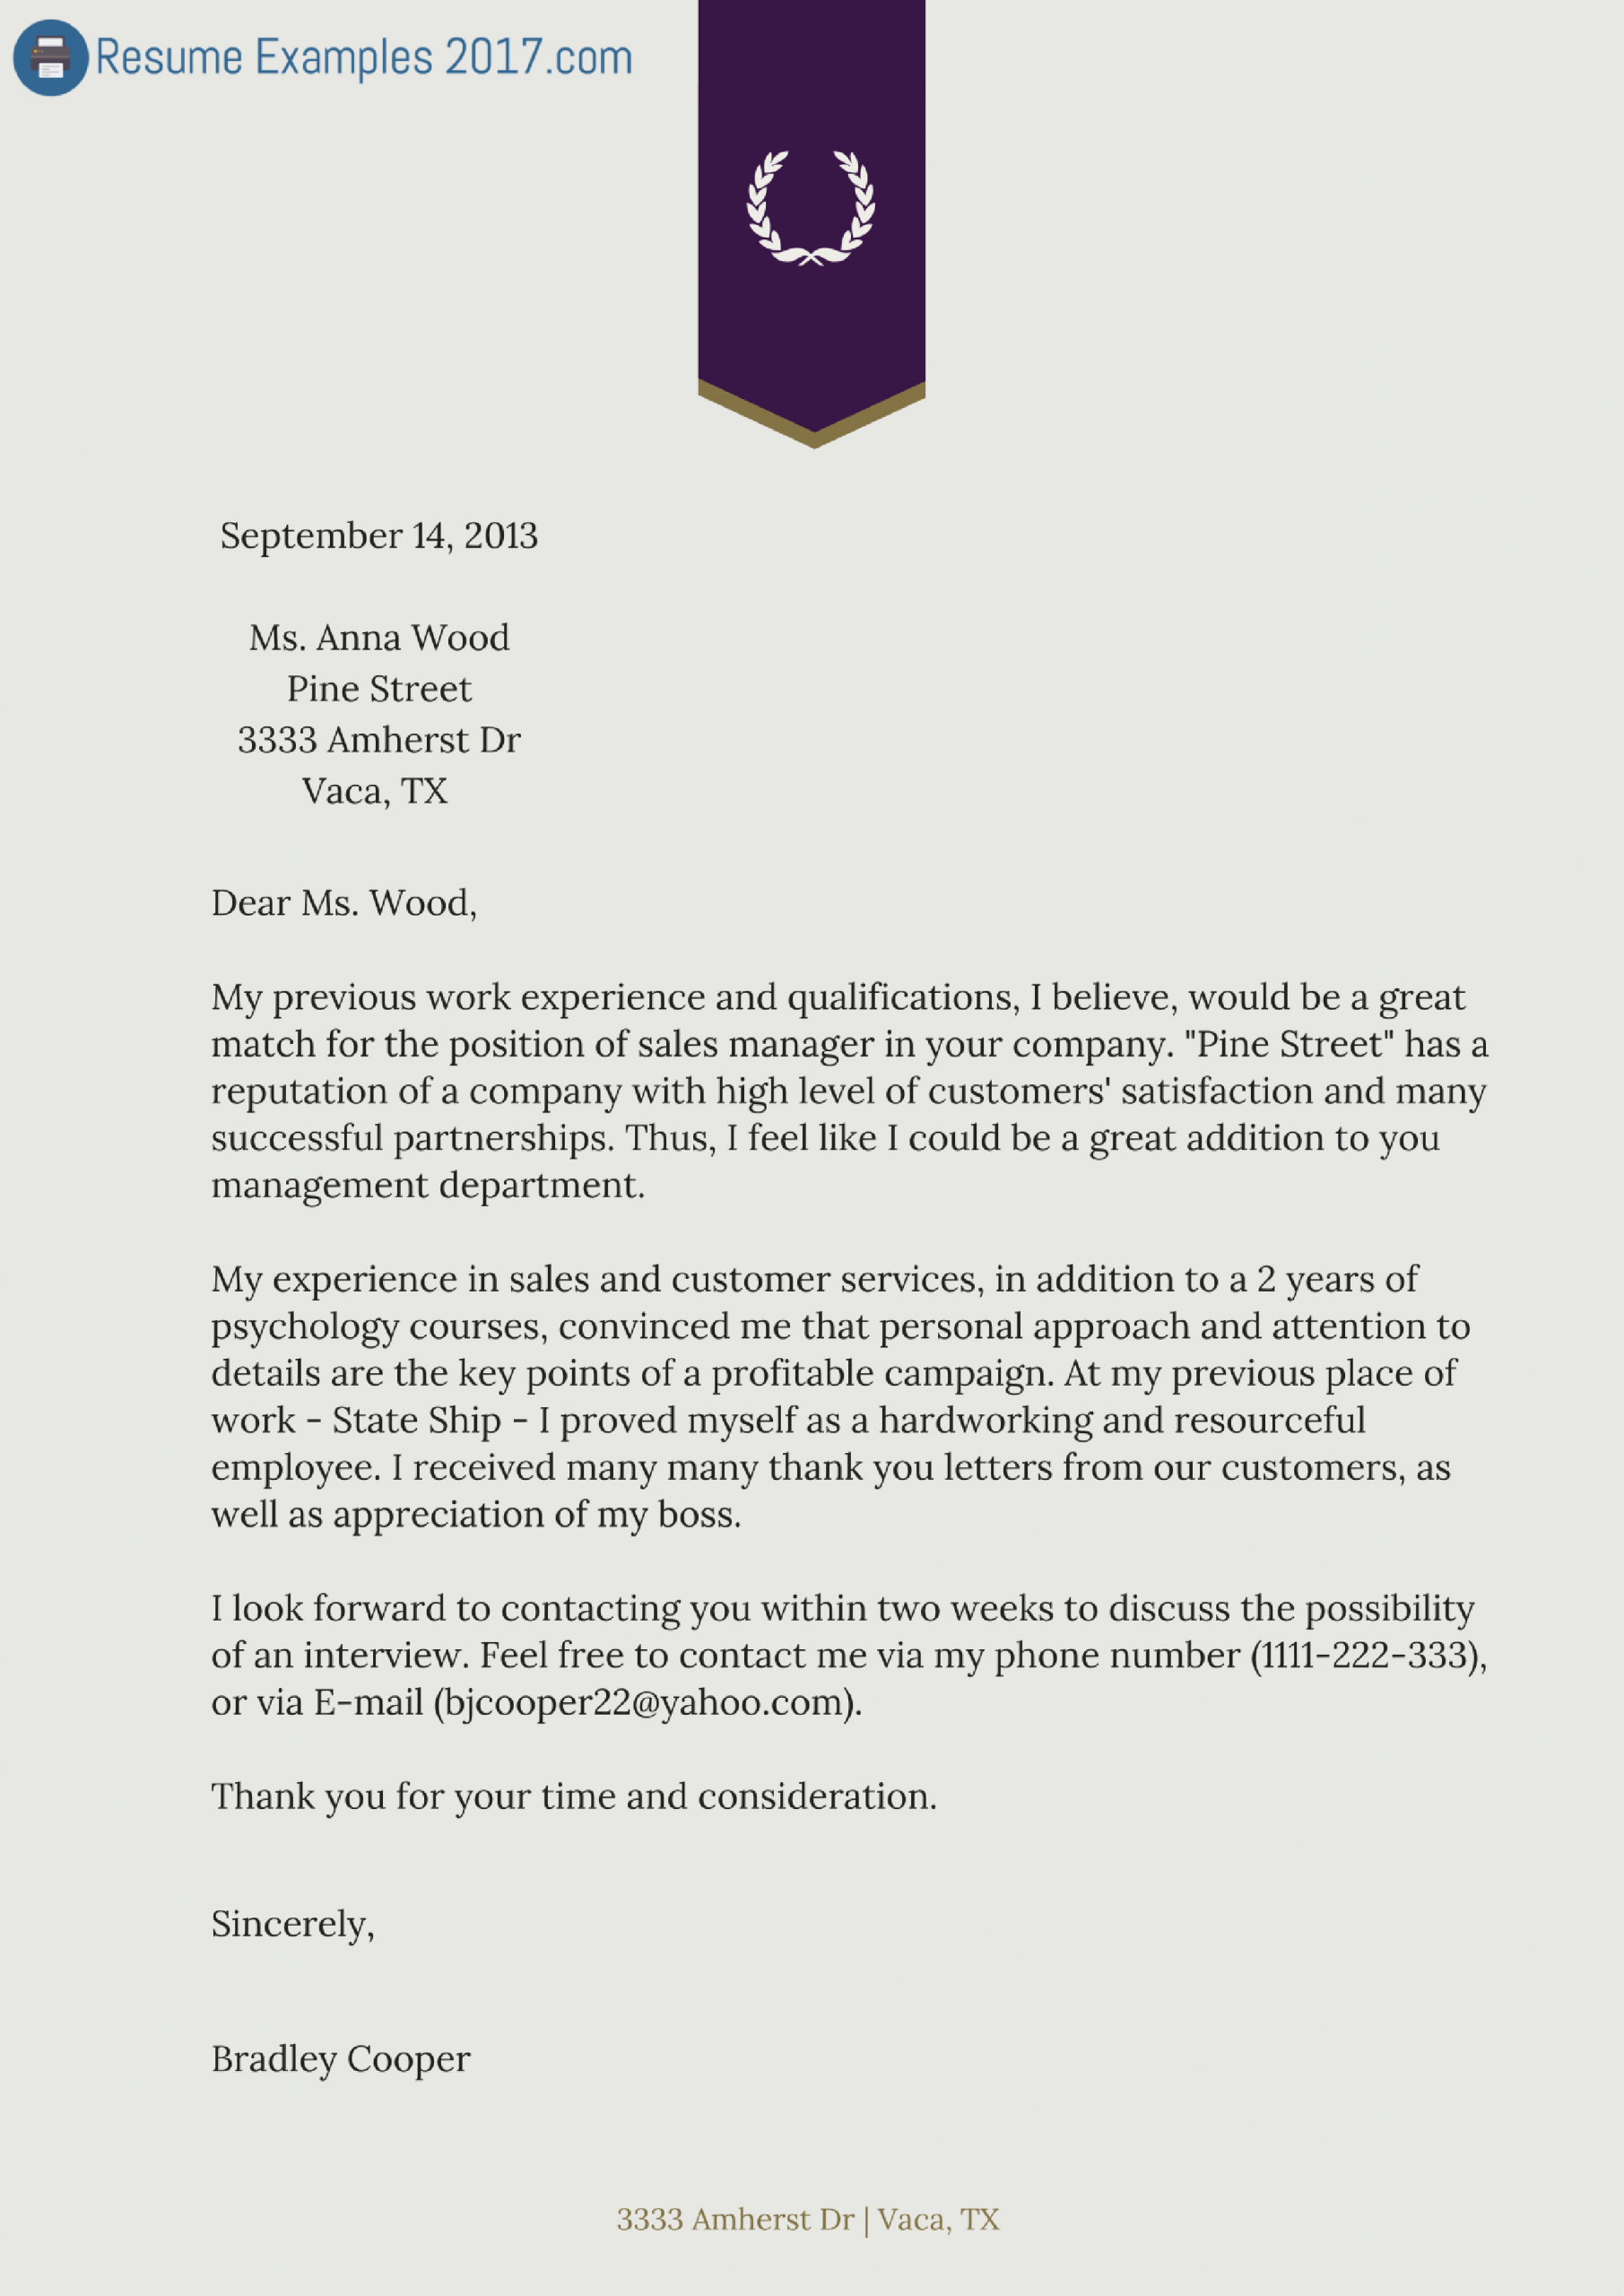 Sample Cover Letter Template Finest Cover Letter Resume Examples